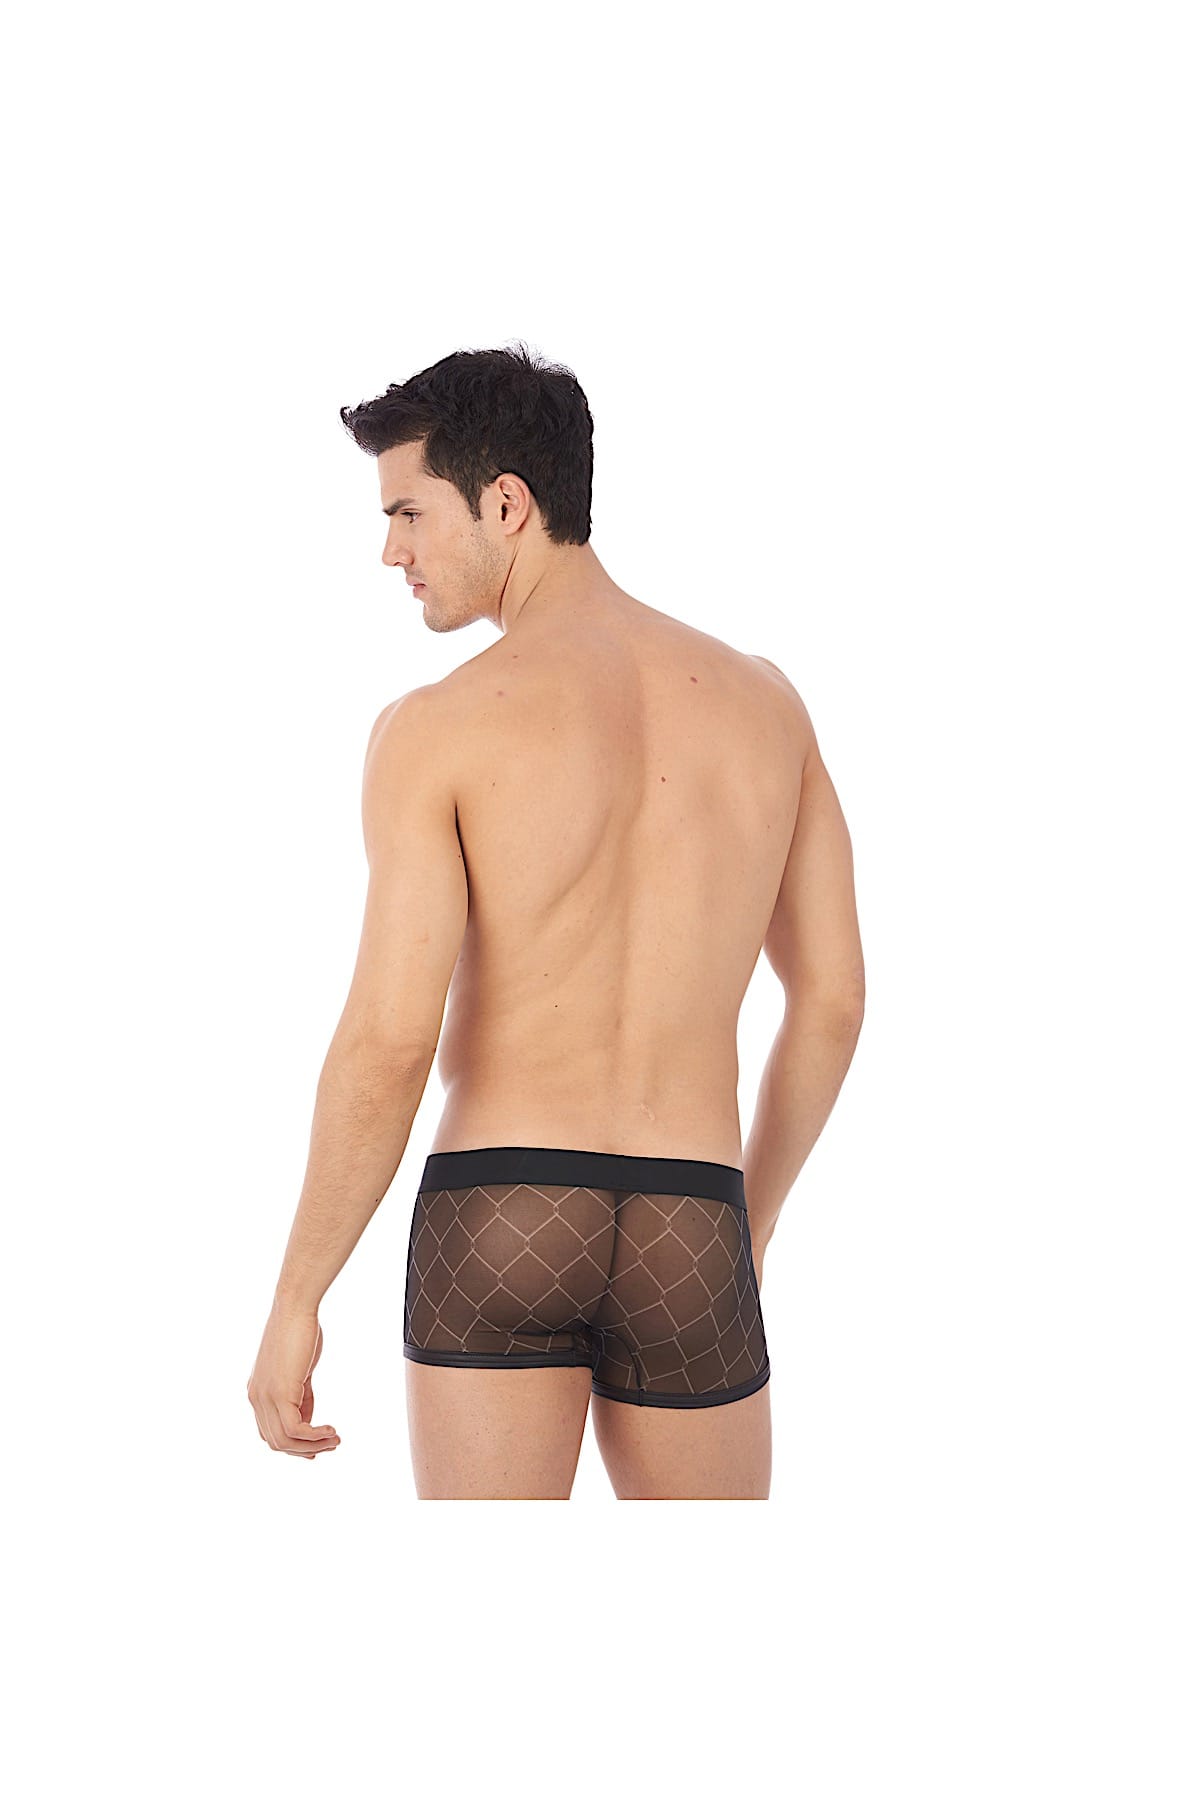 Gregg Homme Black Wired Mesh C-Ring Boxer Brief